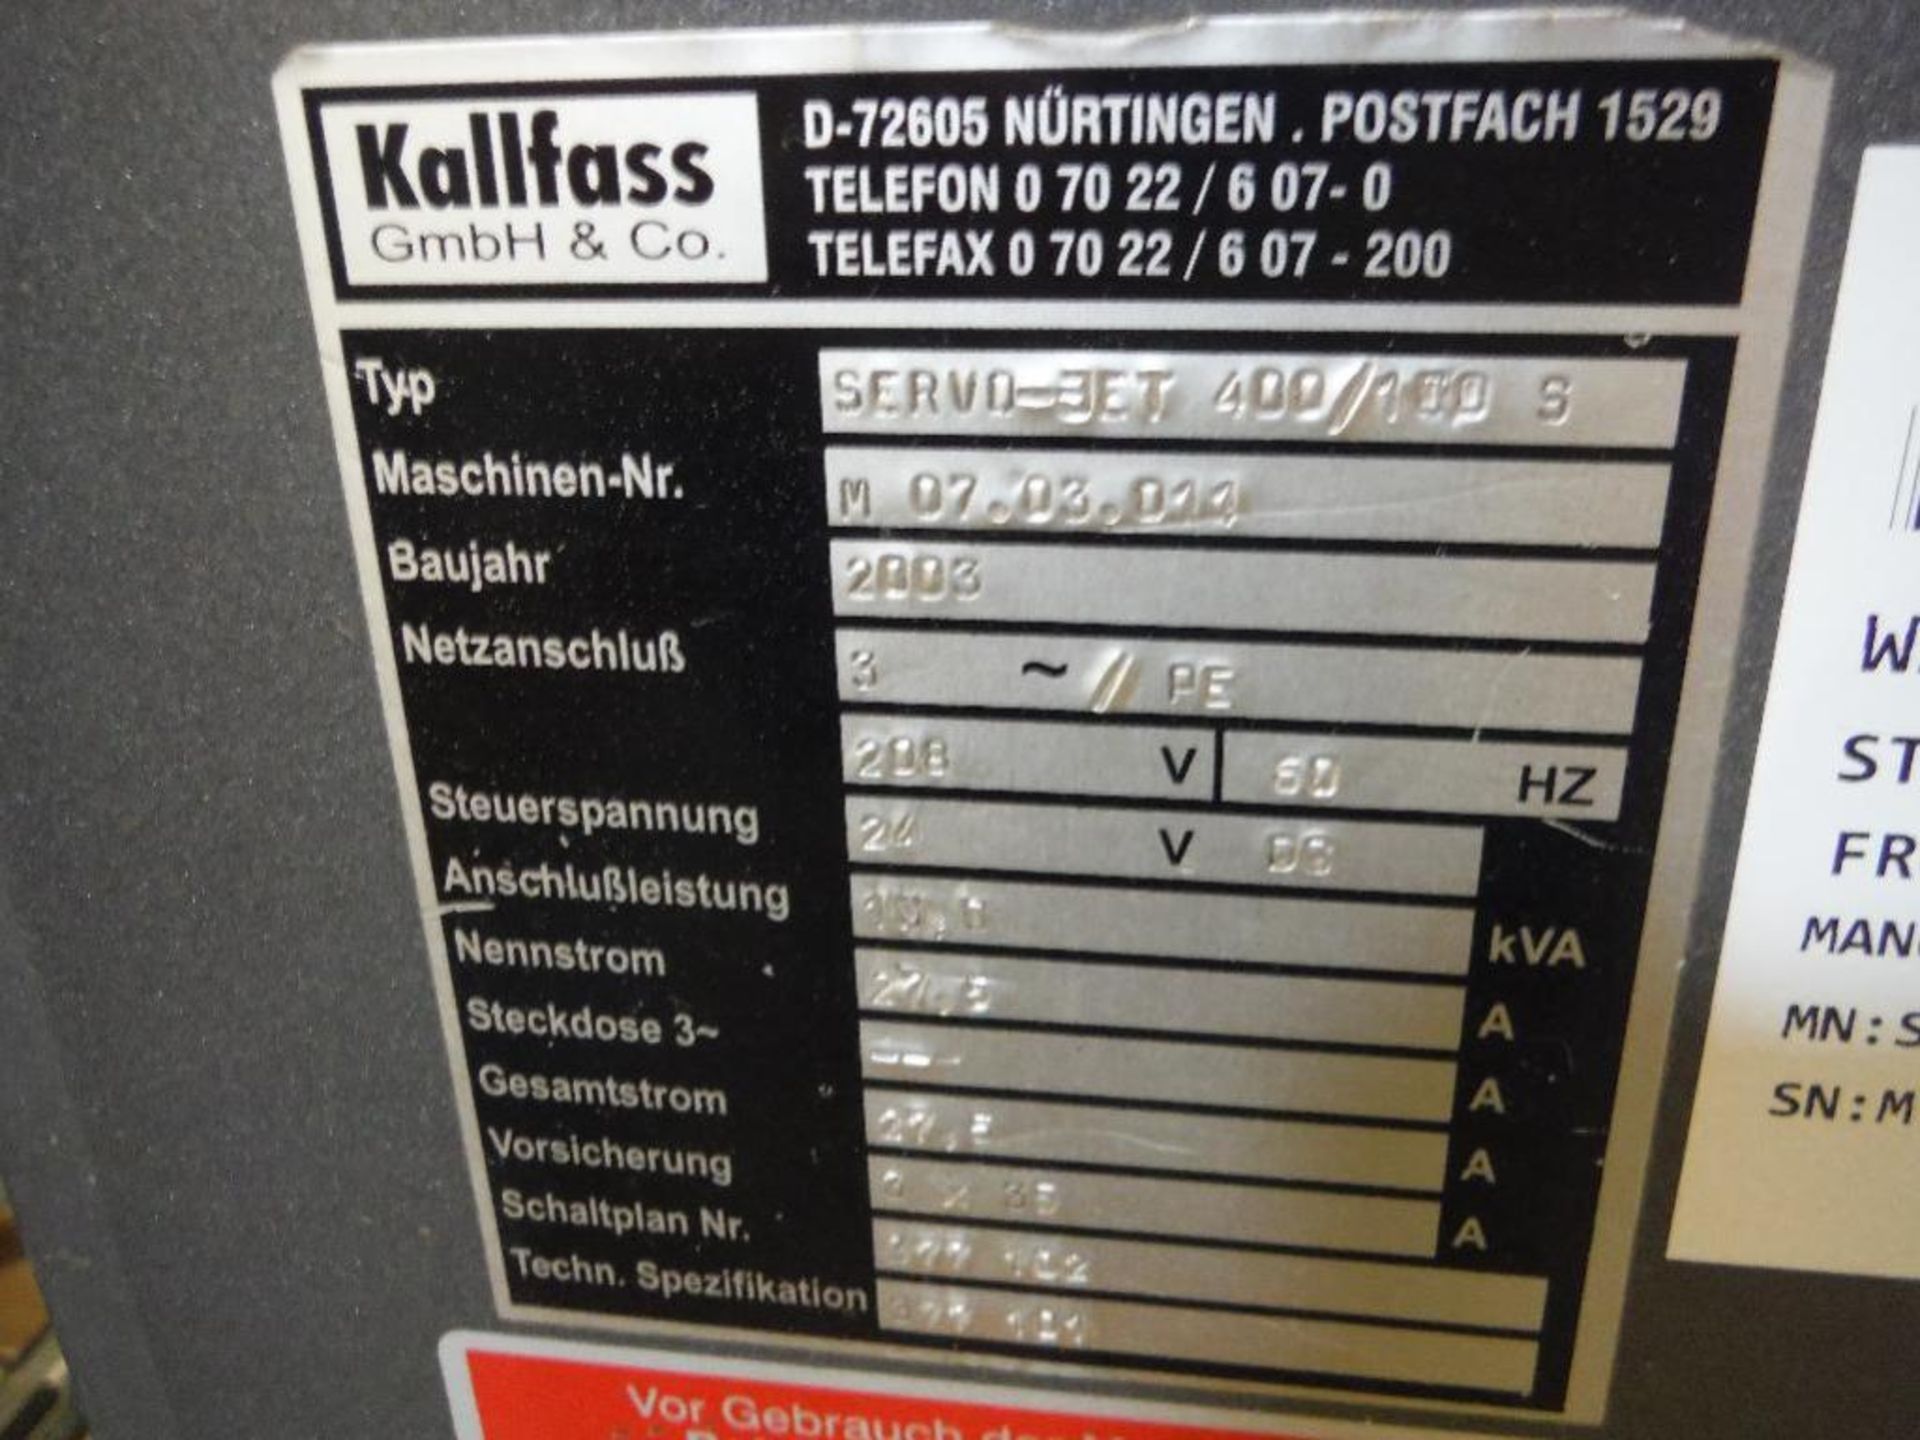 2003 Kalfass overwrapper, Model servo-Jet_400/100_S, SN M_07.03.011, Simatic touch screen ** Rigging - Image 12 of 15